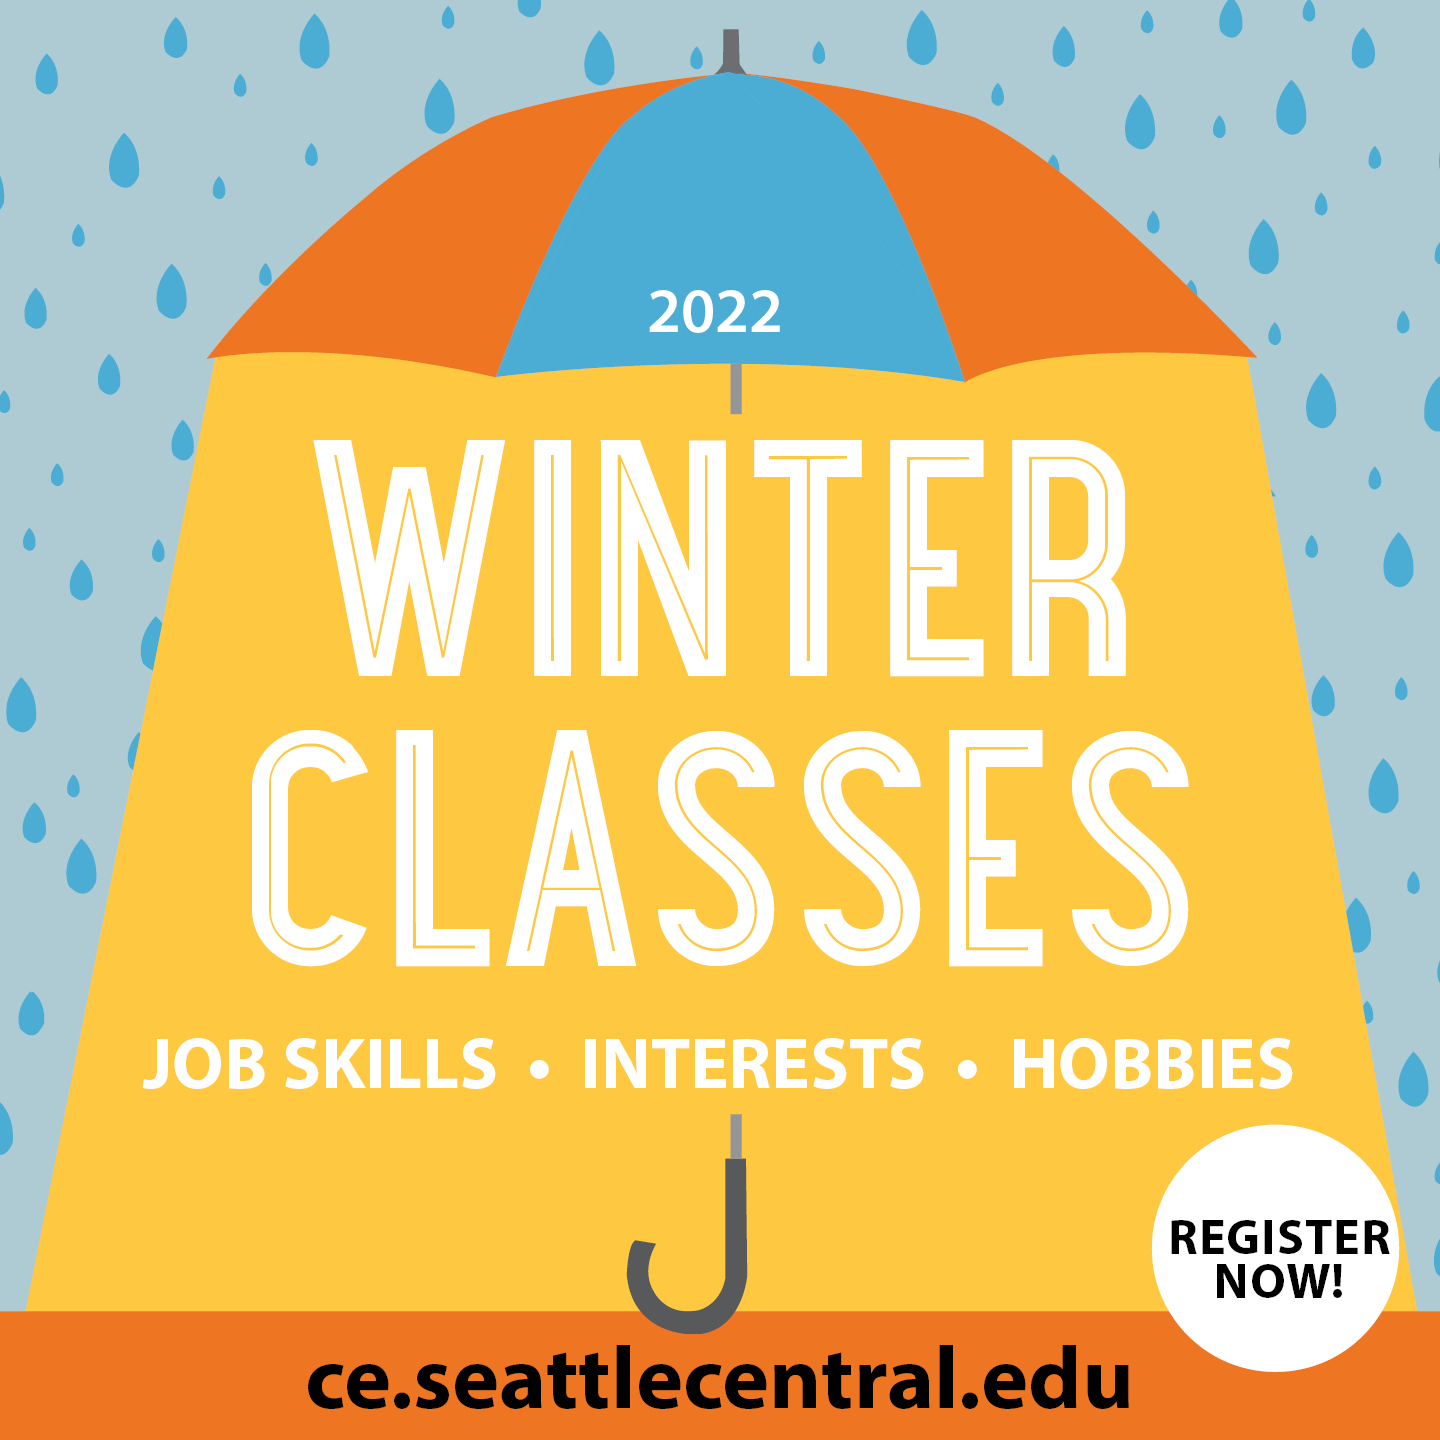 Winter Classes 2022 - square image with umbrella - Continuing Education at Seattle Central College